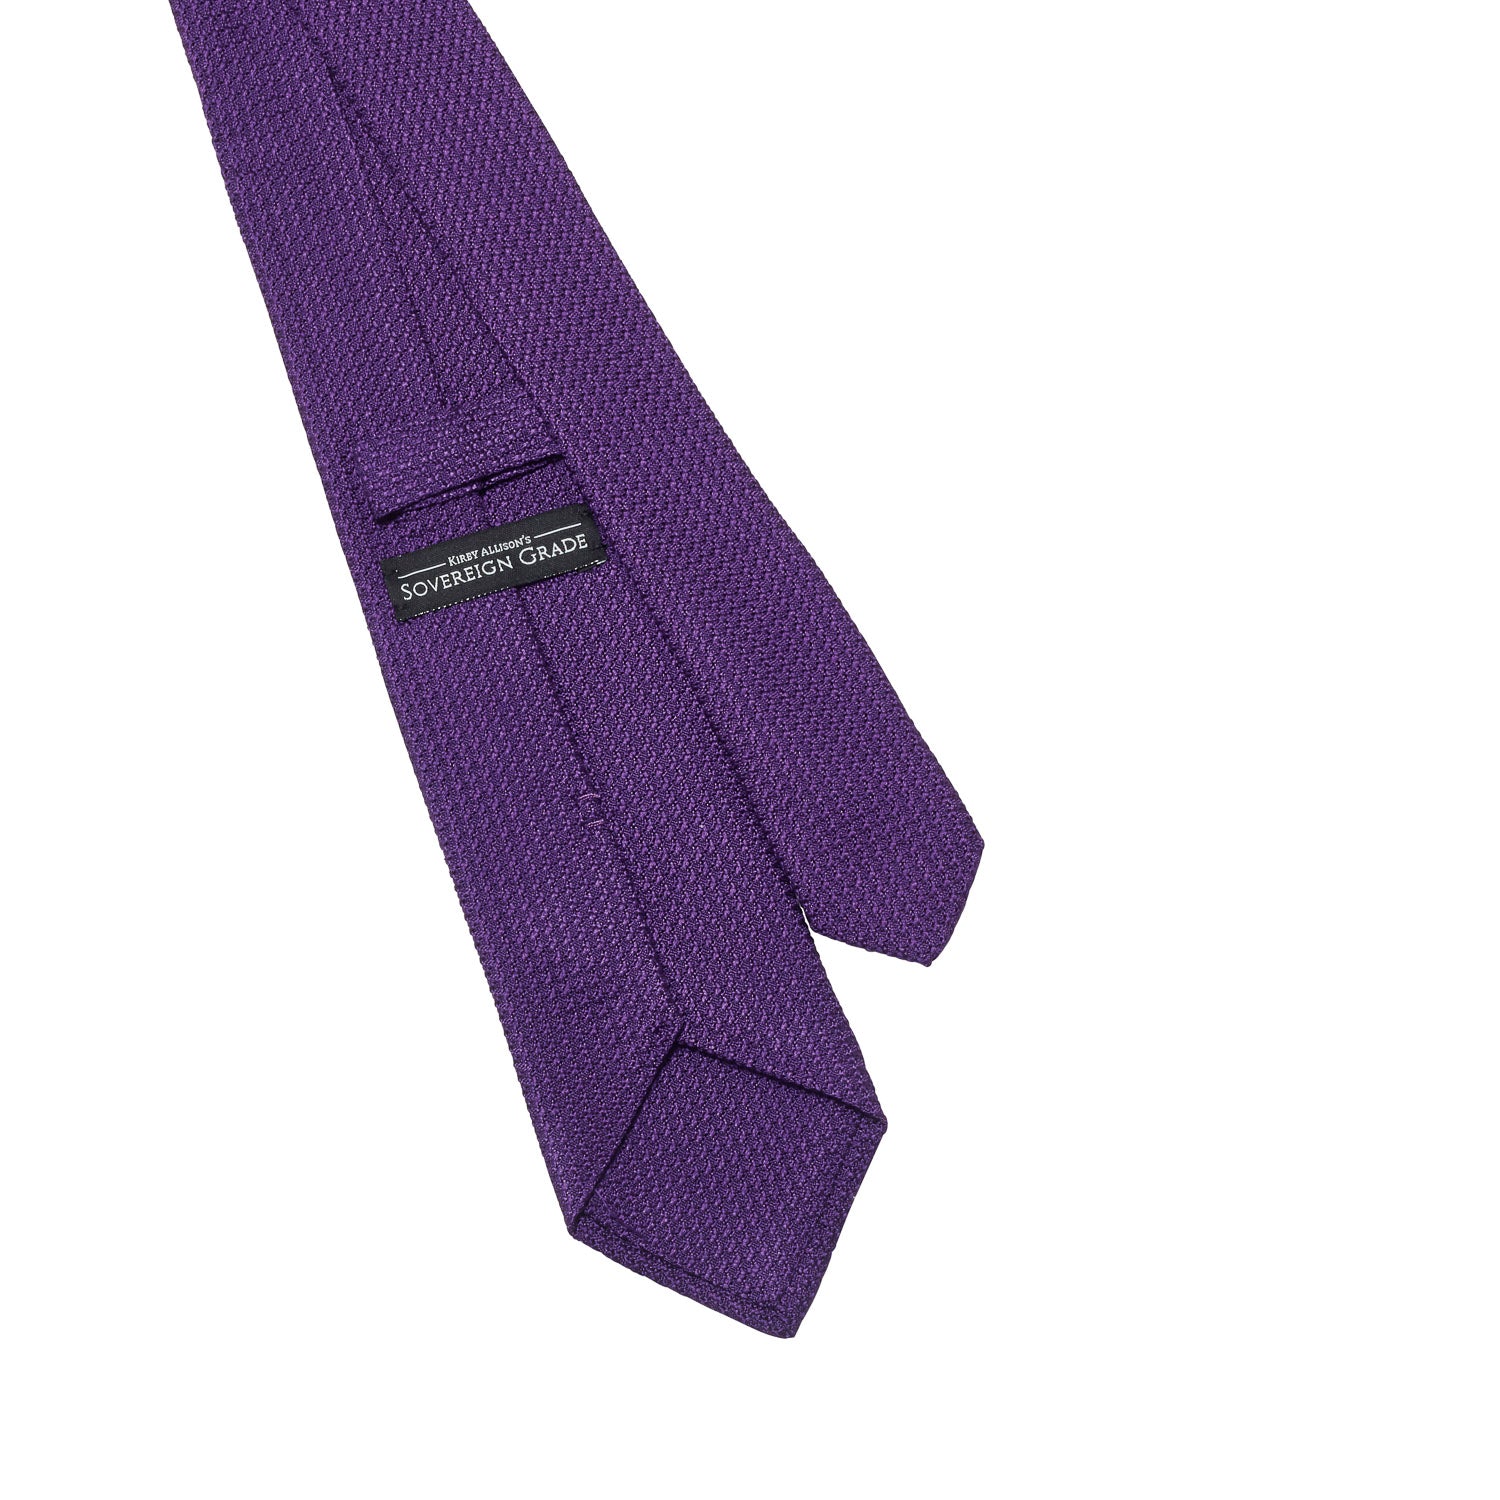 An English Sovereign Grade Purple Grenadine Grossa Tie handcrafted in the United Kingdom by KirbyAllison.com.